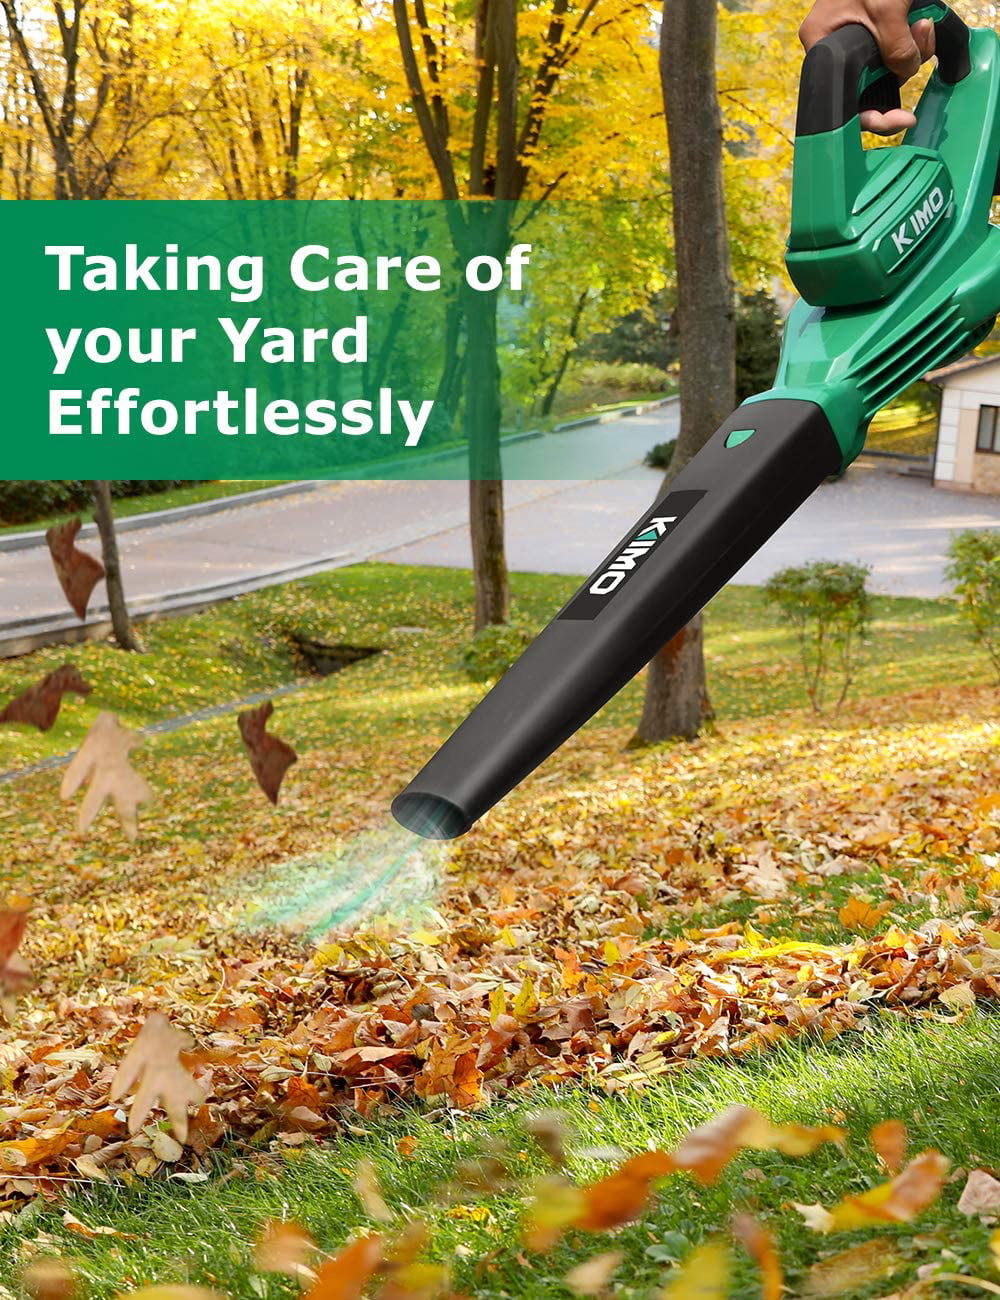 Work Around The House 20V Electric Leaf Blower with Battery and Charger for Garden KIMO 400CFM 90MPH Battery-Powered Blower for Blowing Wet Leaves Yard Cordless Leaf Blower Snow Debris and Dust 